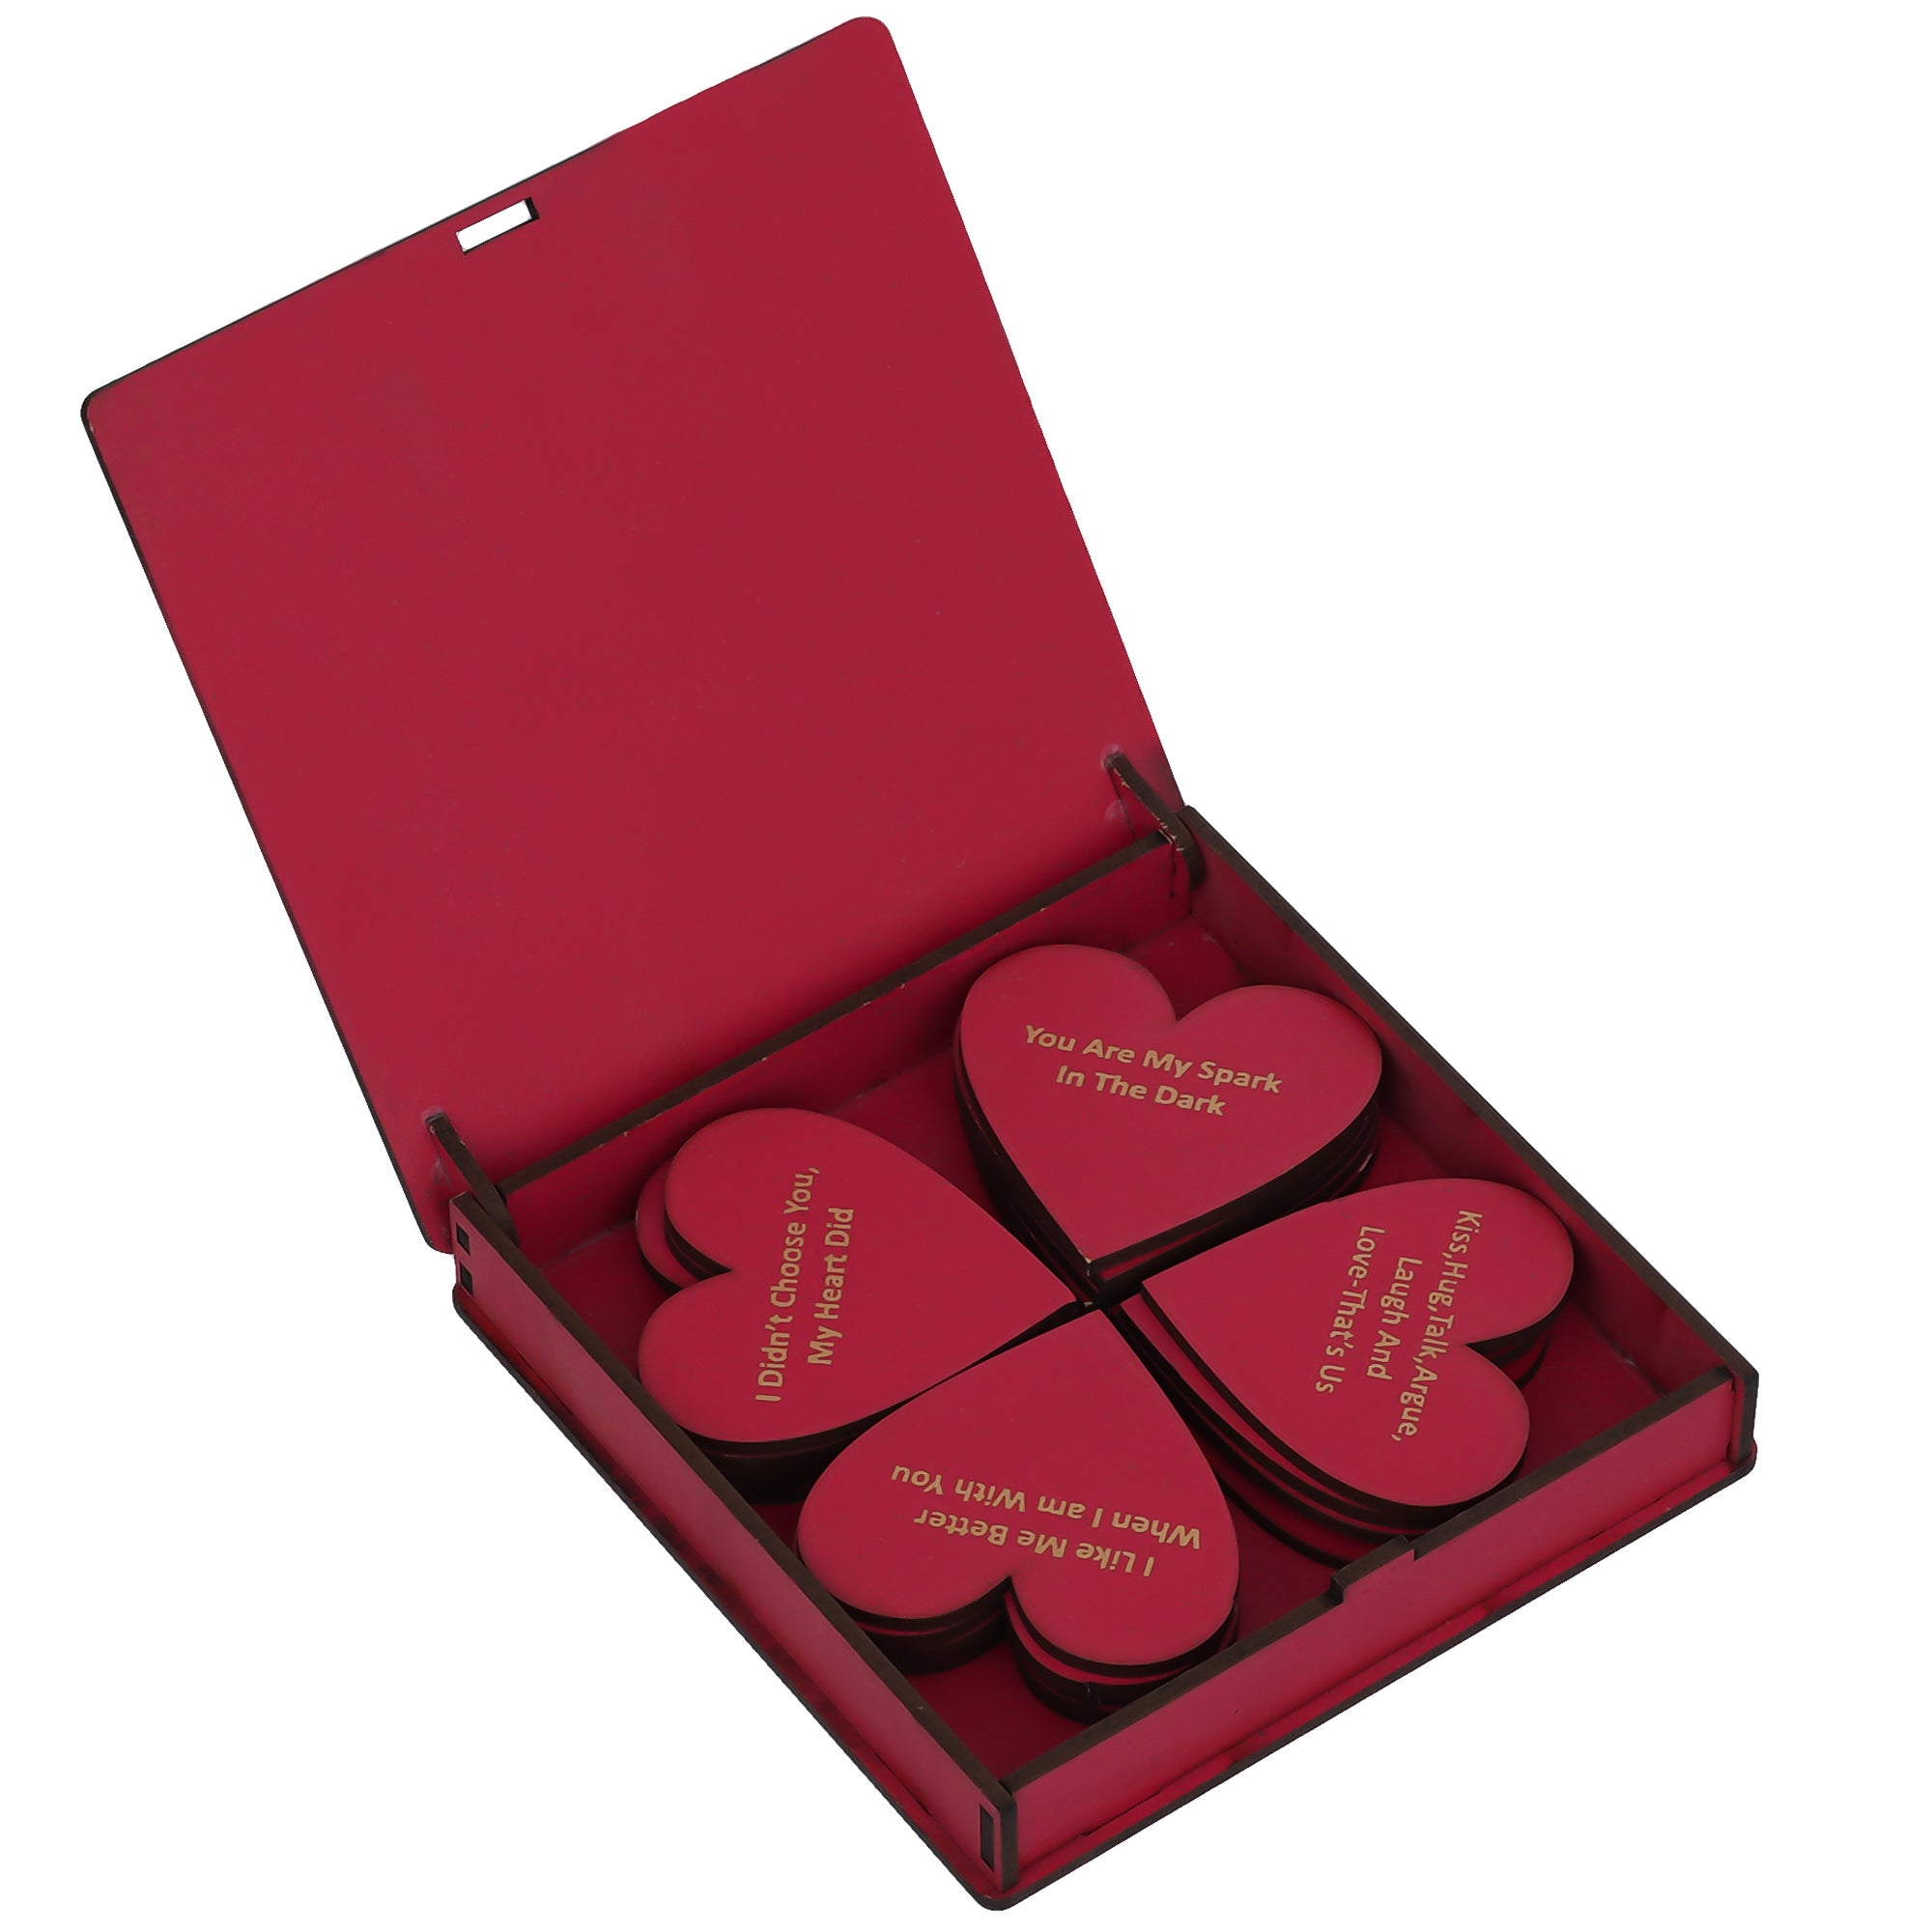 Valentine Combo of Golden Red Rose Gift Set, "20 Reasons Why I Love You" Printed on Little Red Hearts Decorative Wooden Gift Set Box 6